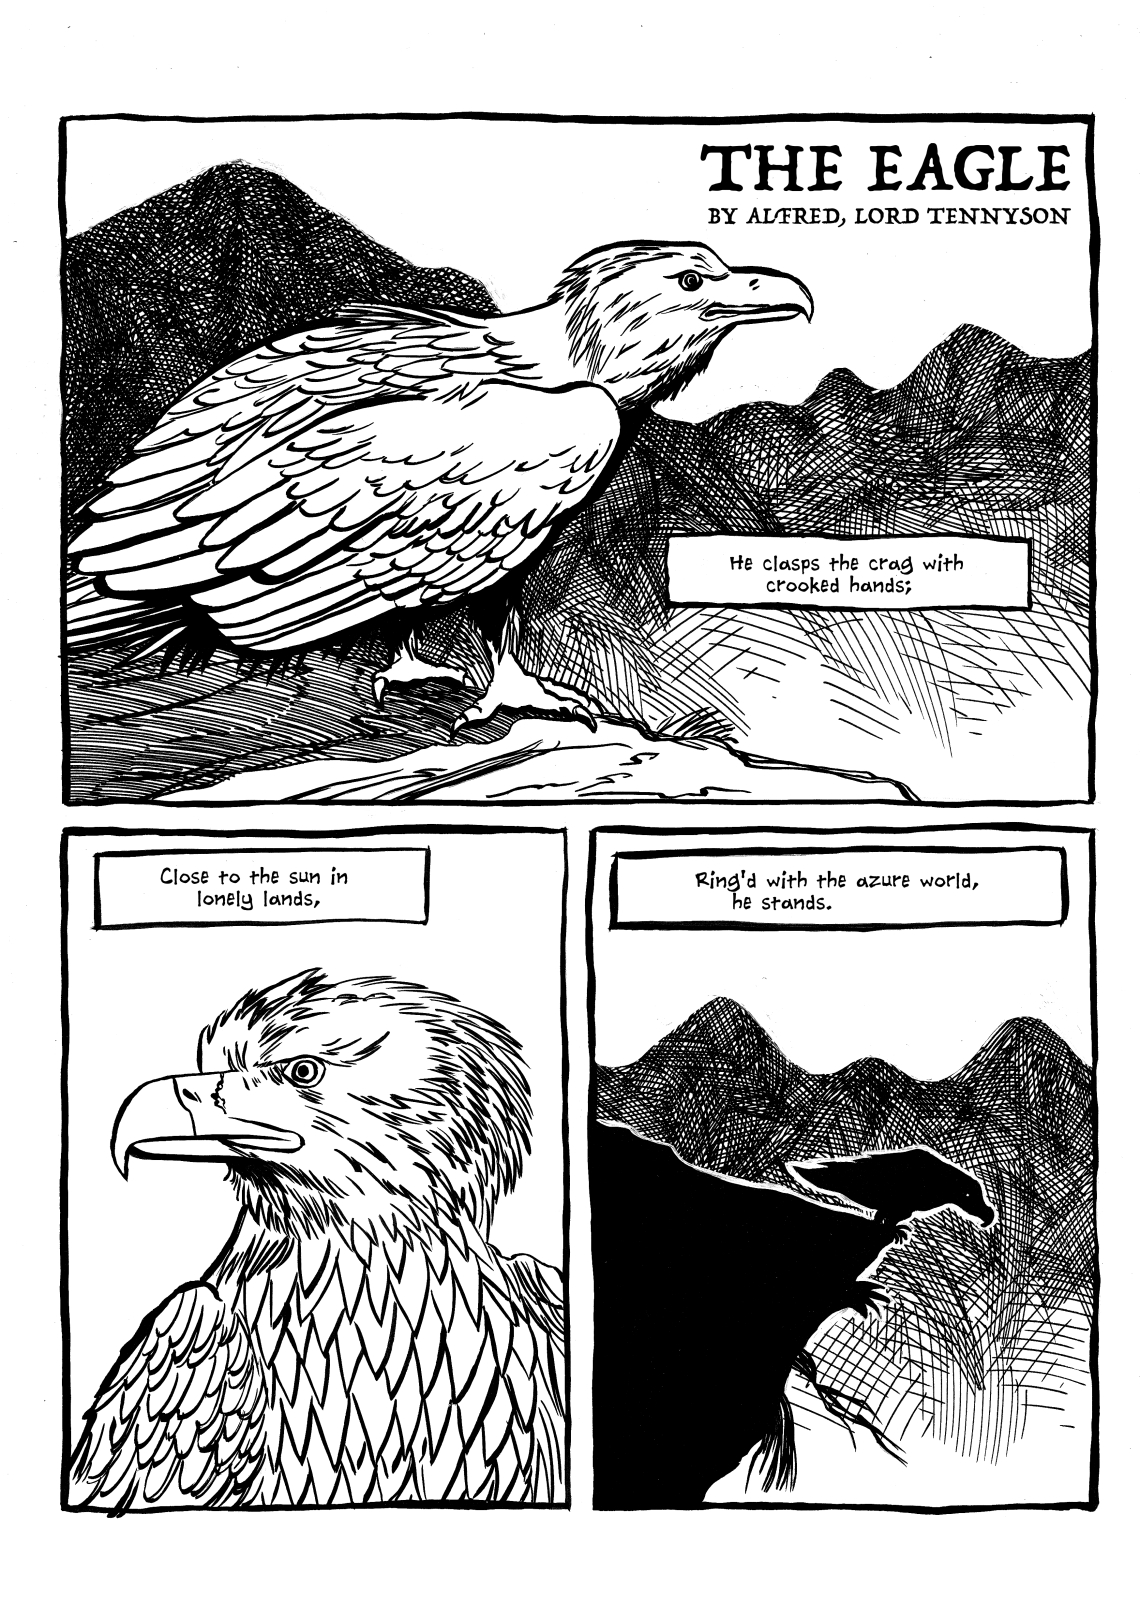 16. THE EAGLE 01 (DONE)